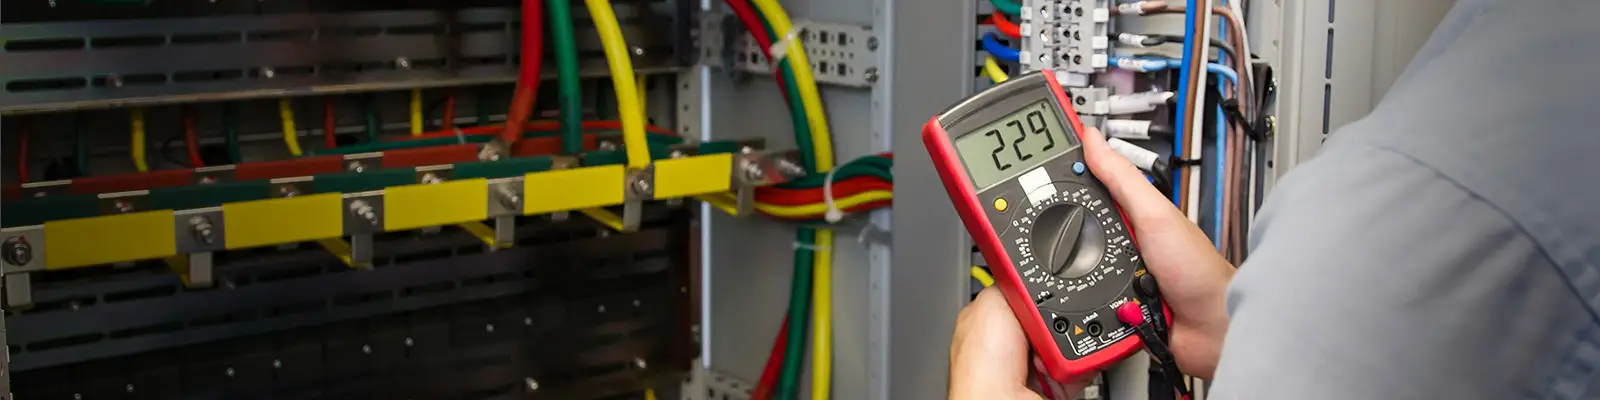 Electrician Testing Cable with Multimeter